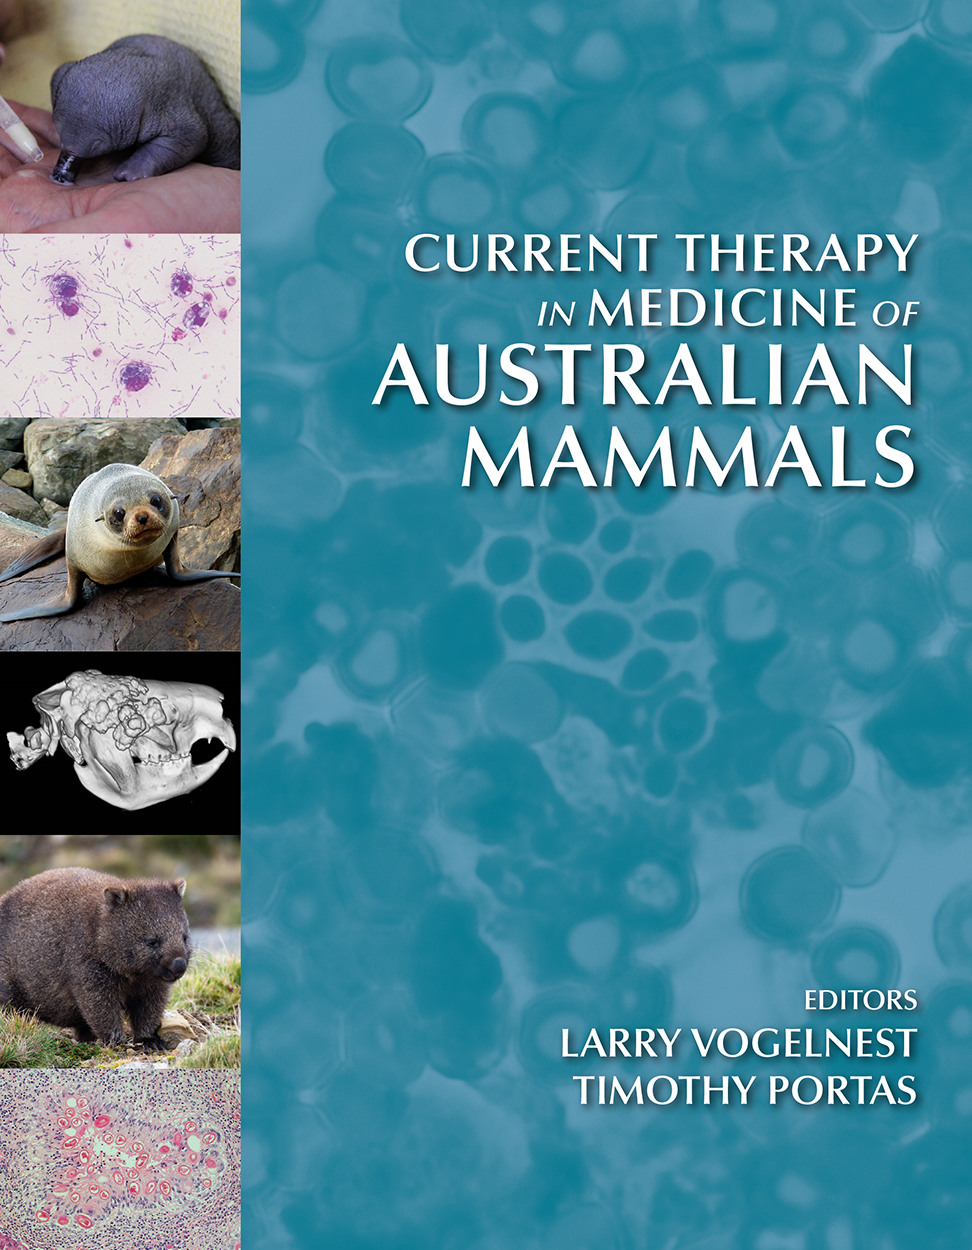 Cover of Current Therapy in Medicine of Australian Mammals, featuring pictures of Australian mammals, an animal skull, and photos of cells down the le